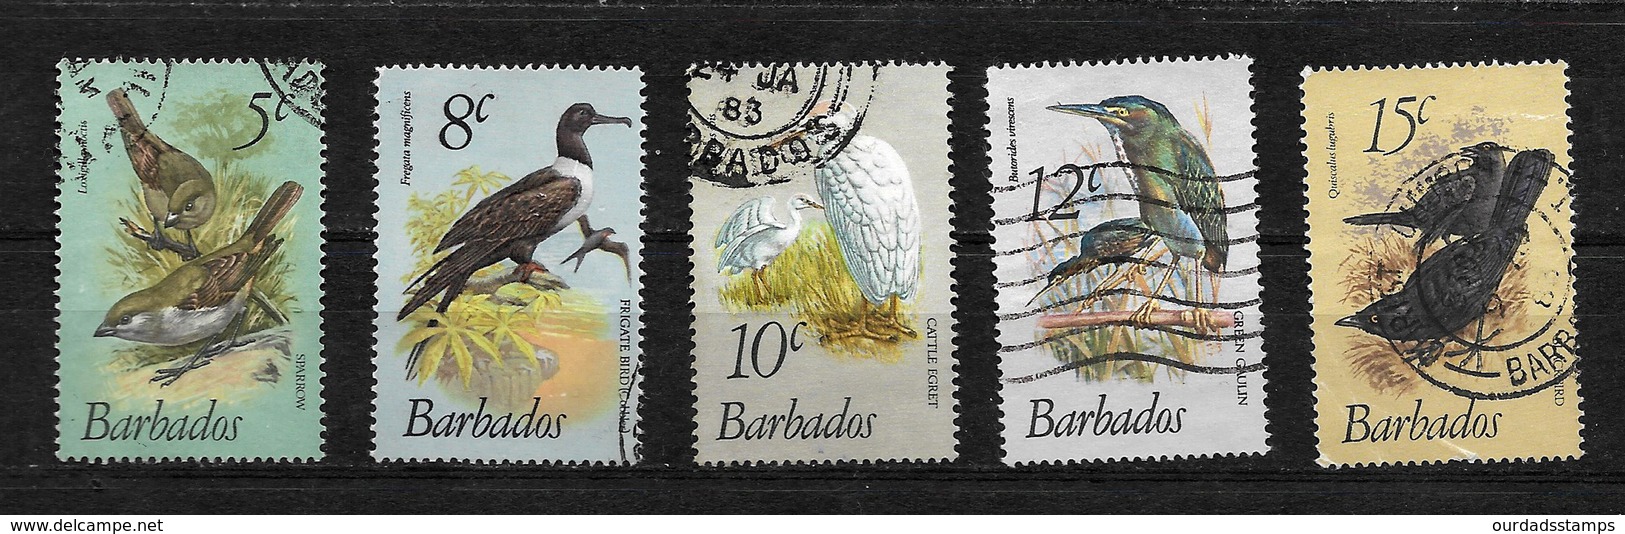 Barbados QEII 1979 Birds,, Small Selection To $2.50 Used (7204) - Barbades (1966-...)